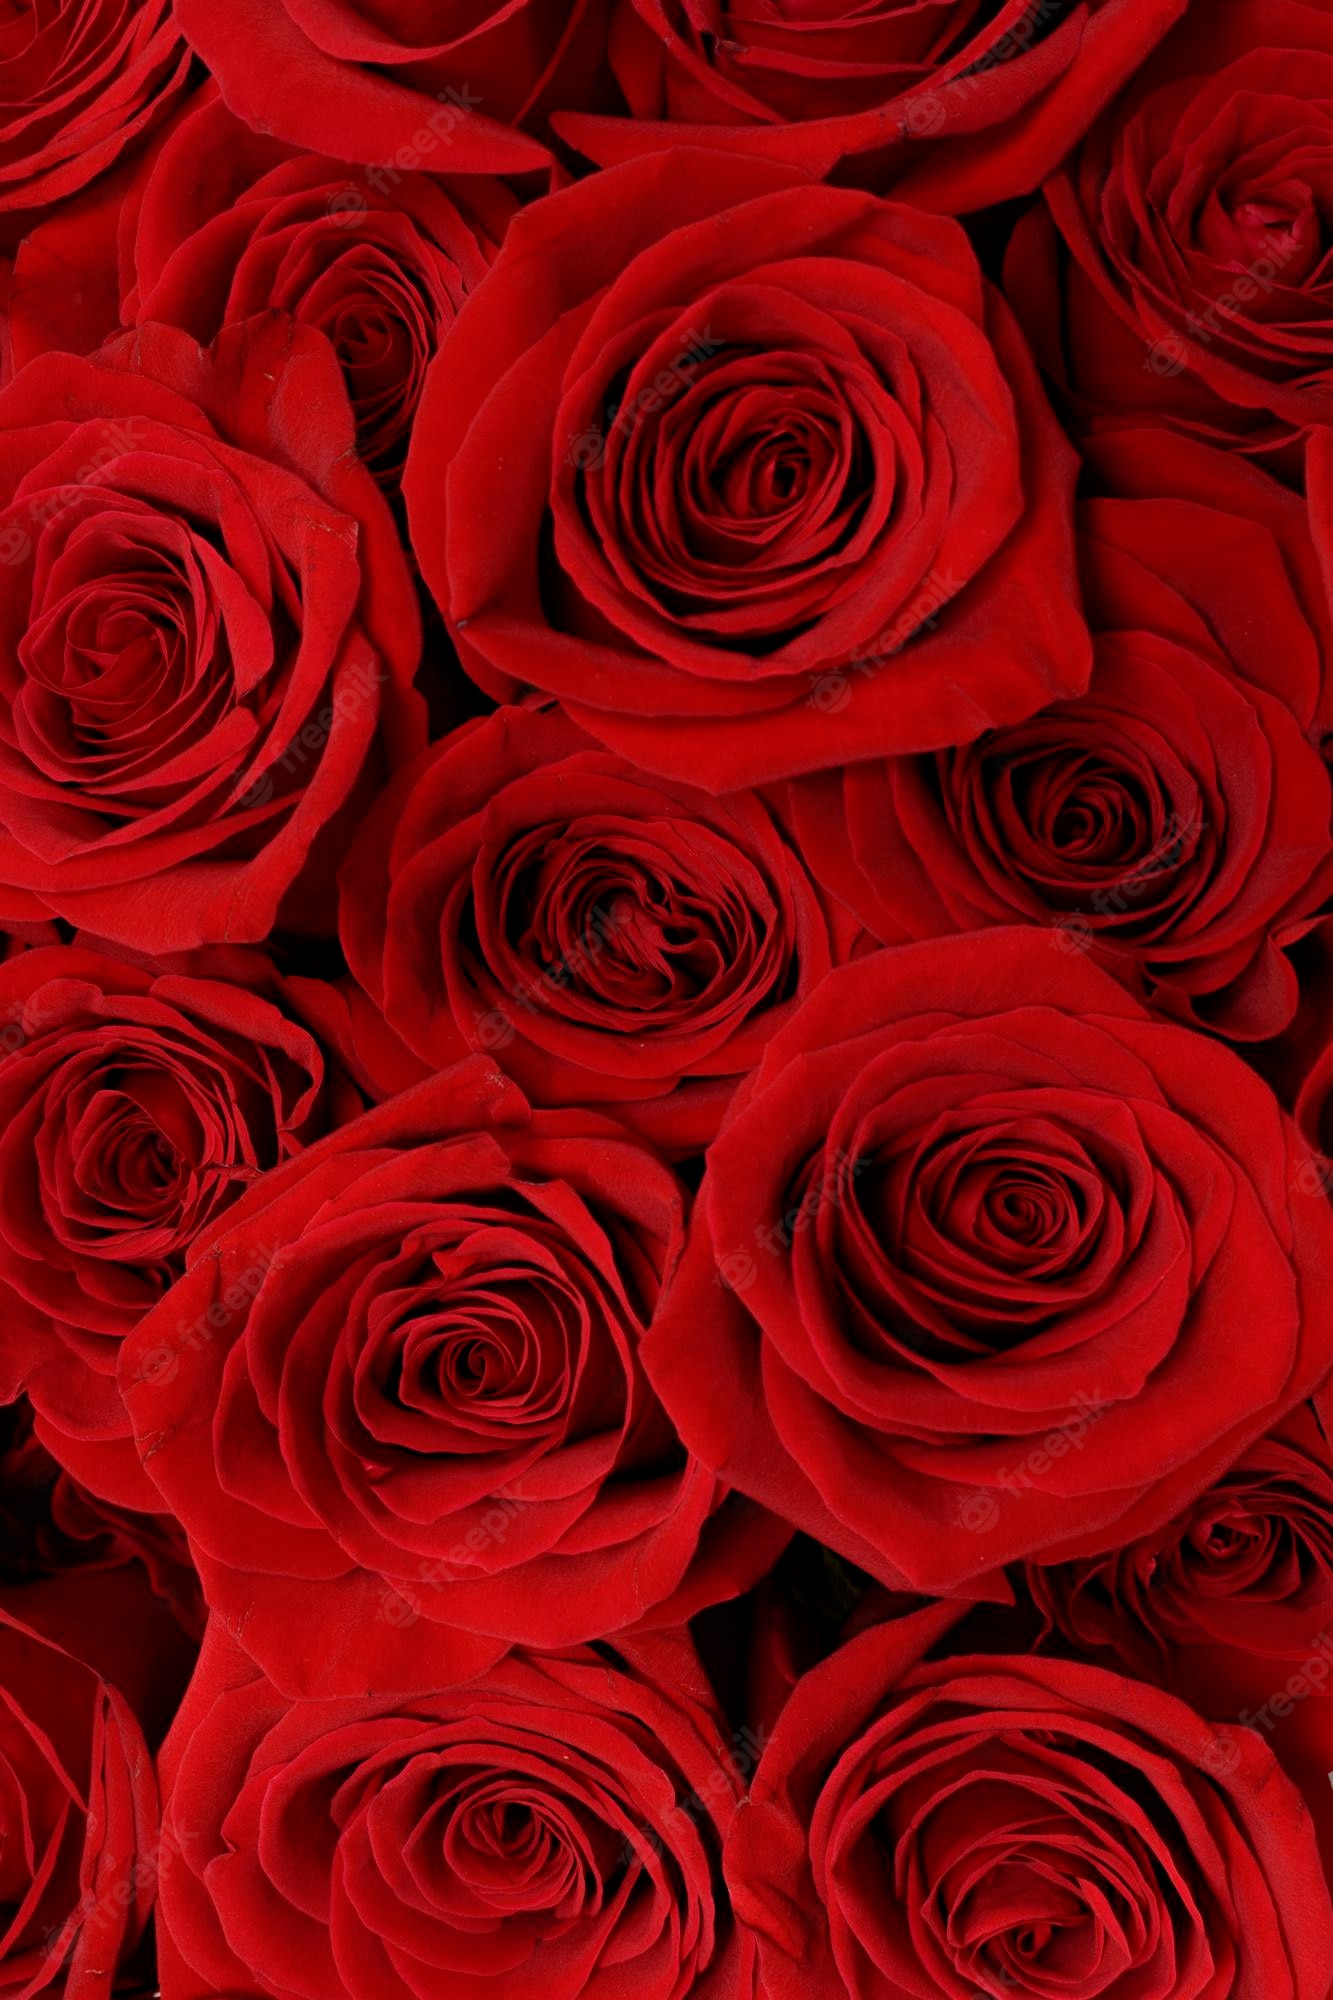 Red Rose Phone Wallpapers